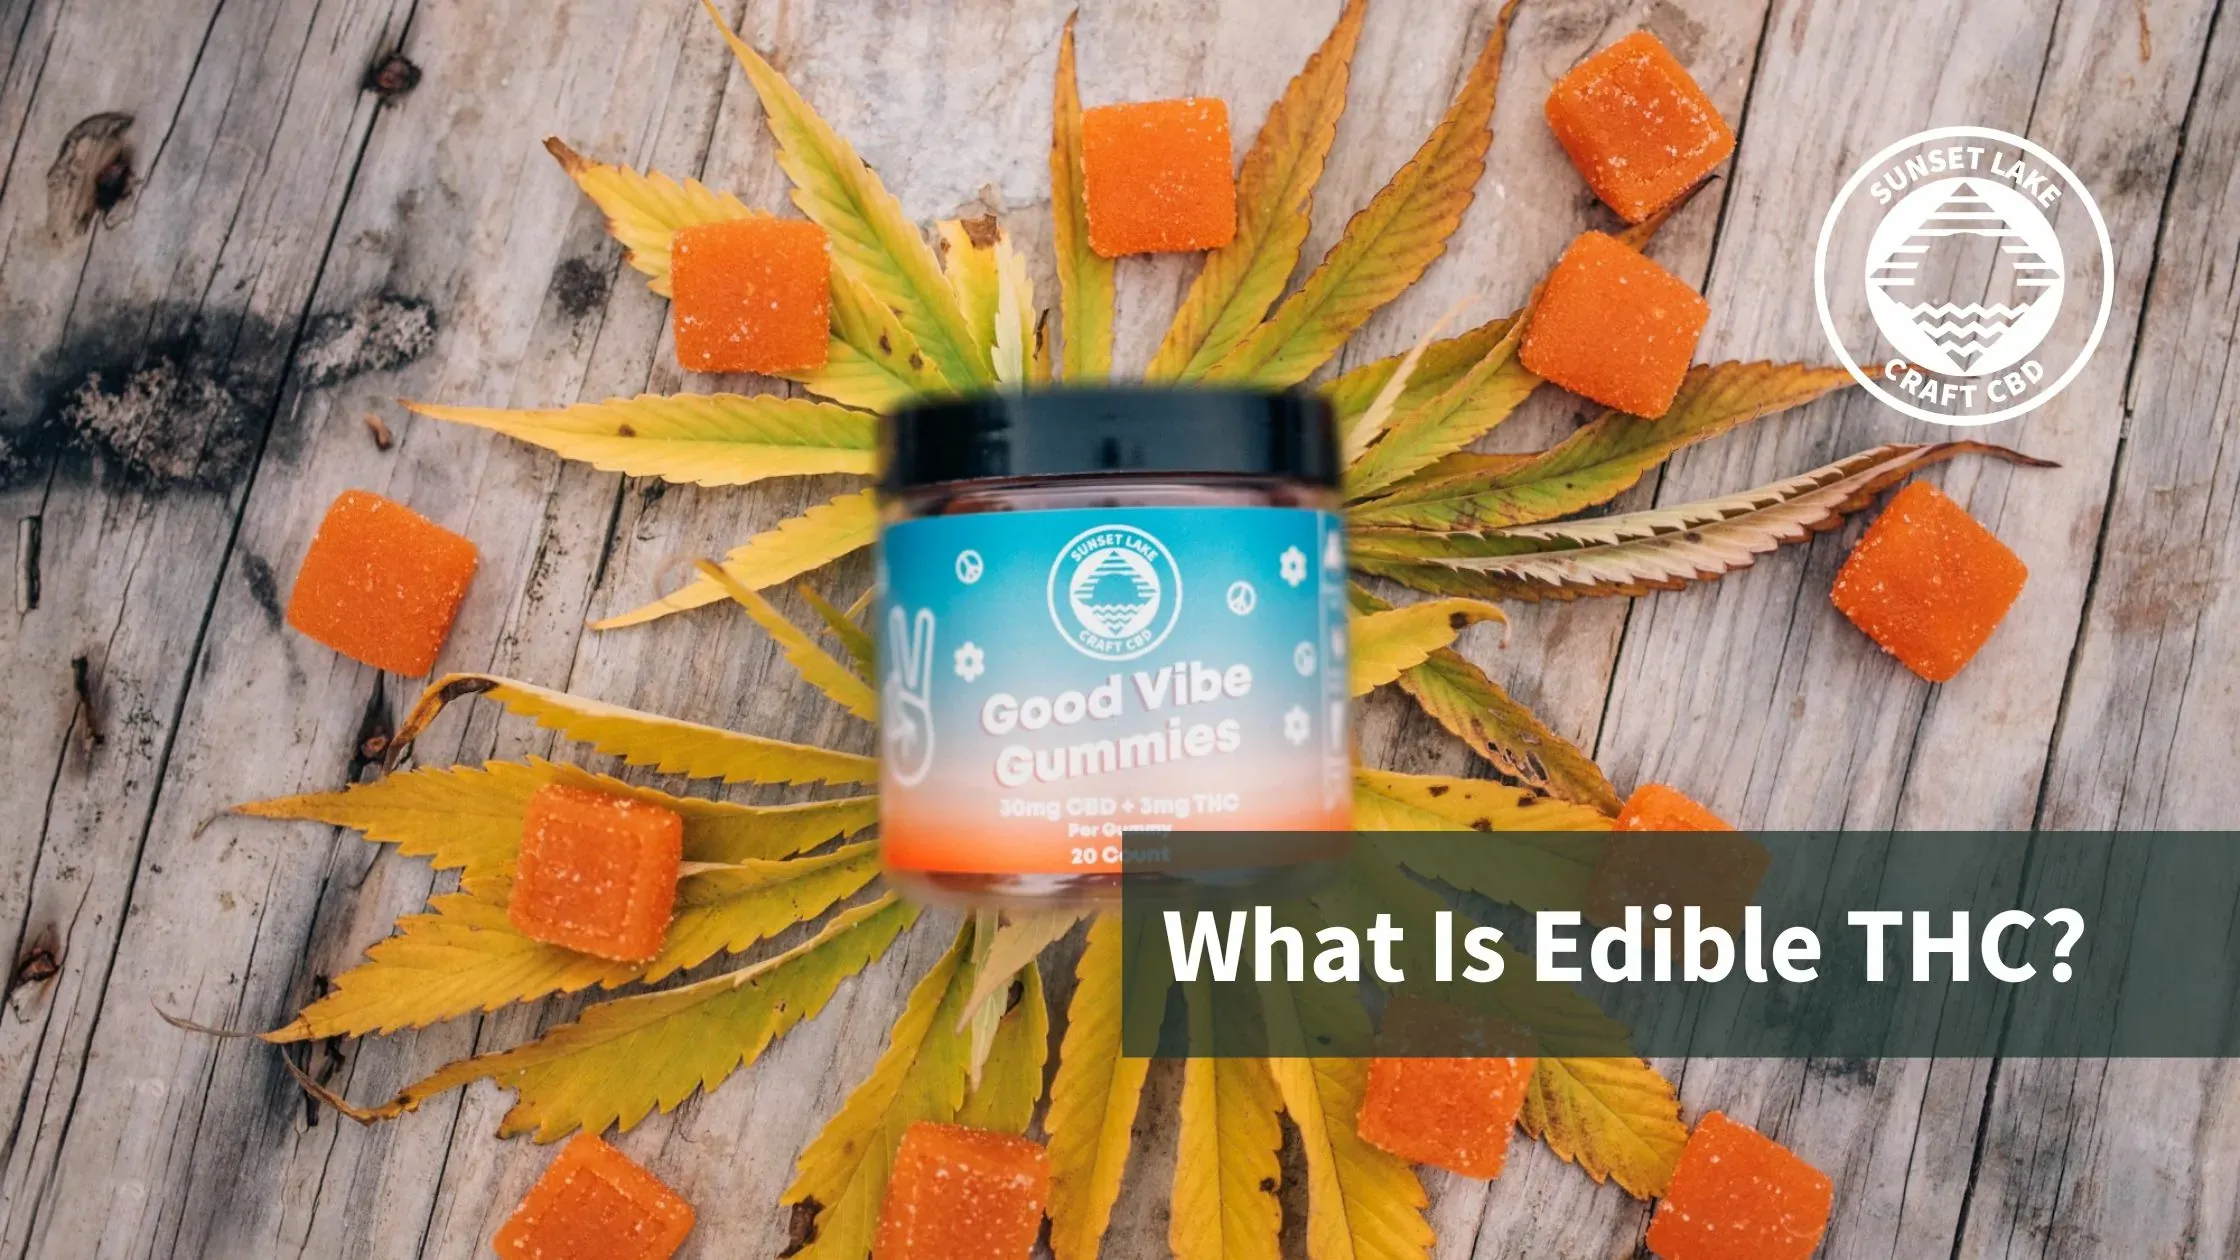 A jar of Good Vibe Gummies surrounded by cannabis leaves. Text reads "What is edible THC?"